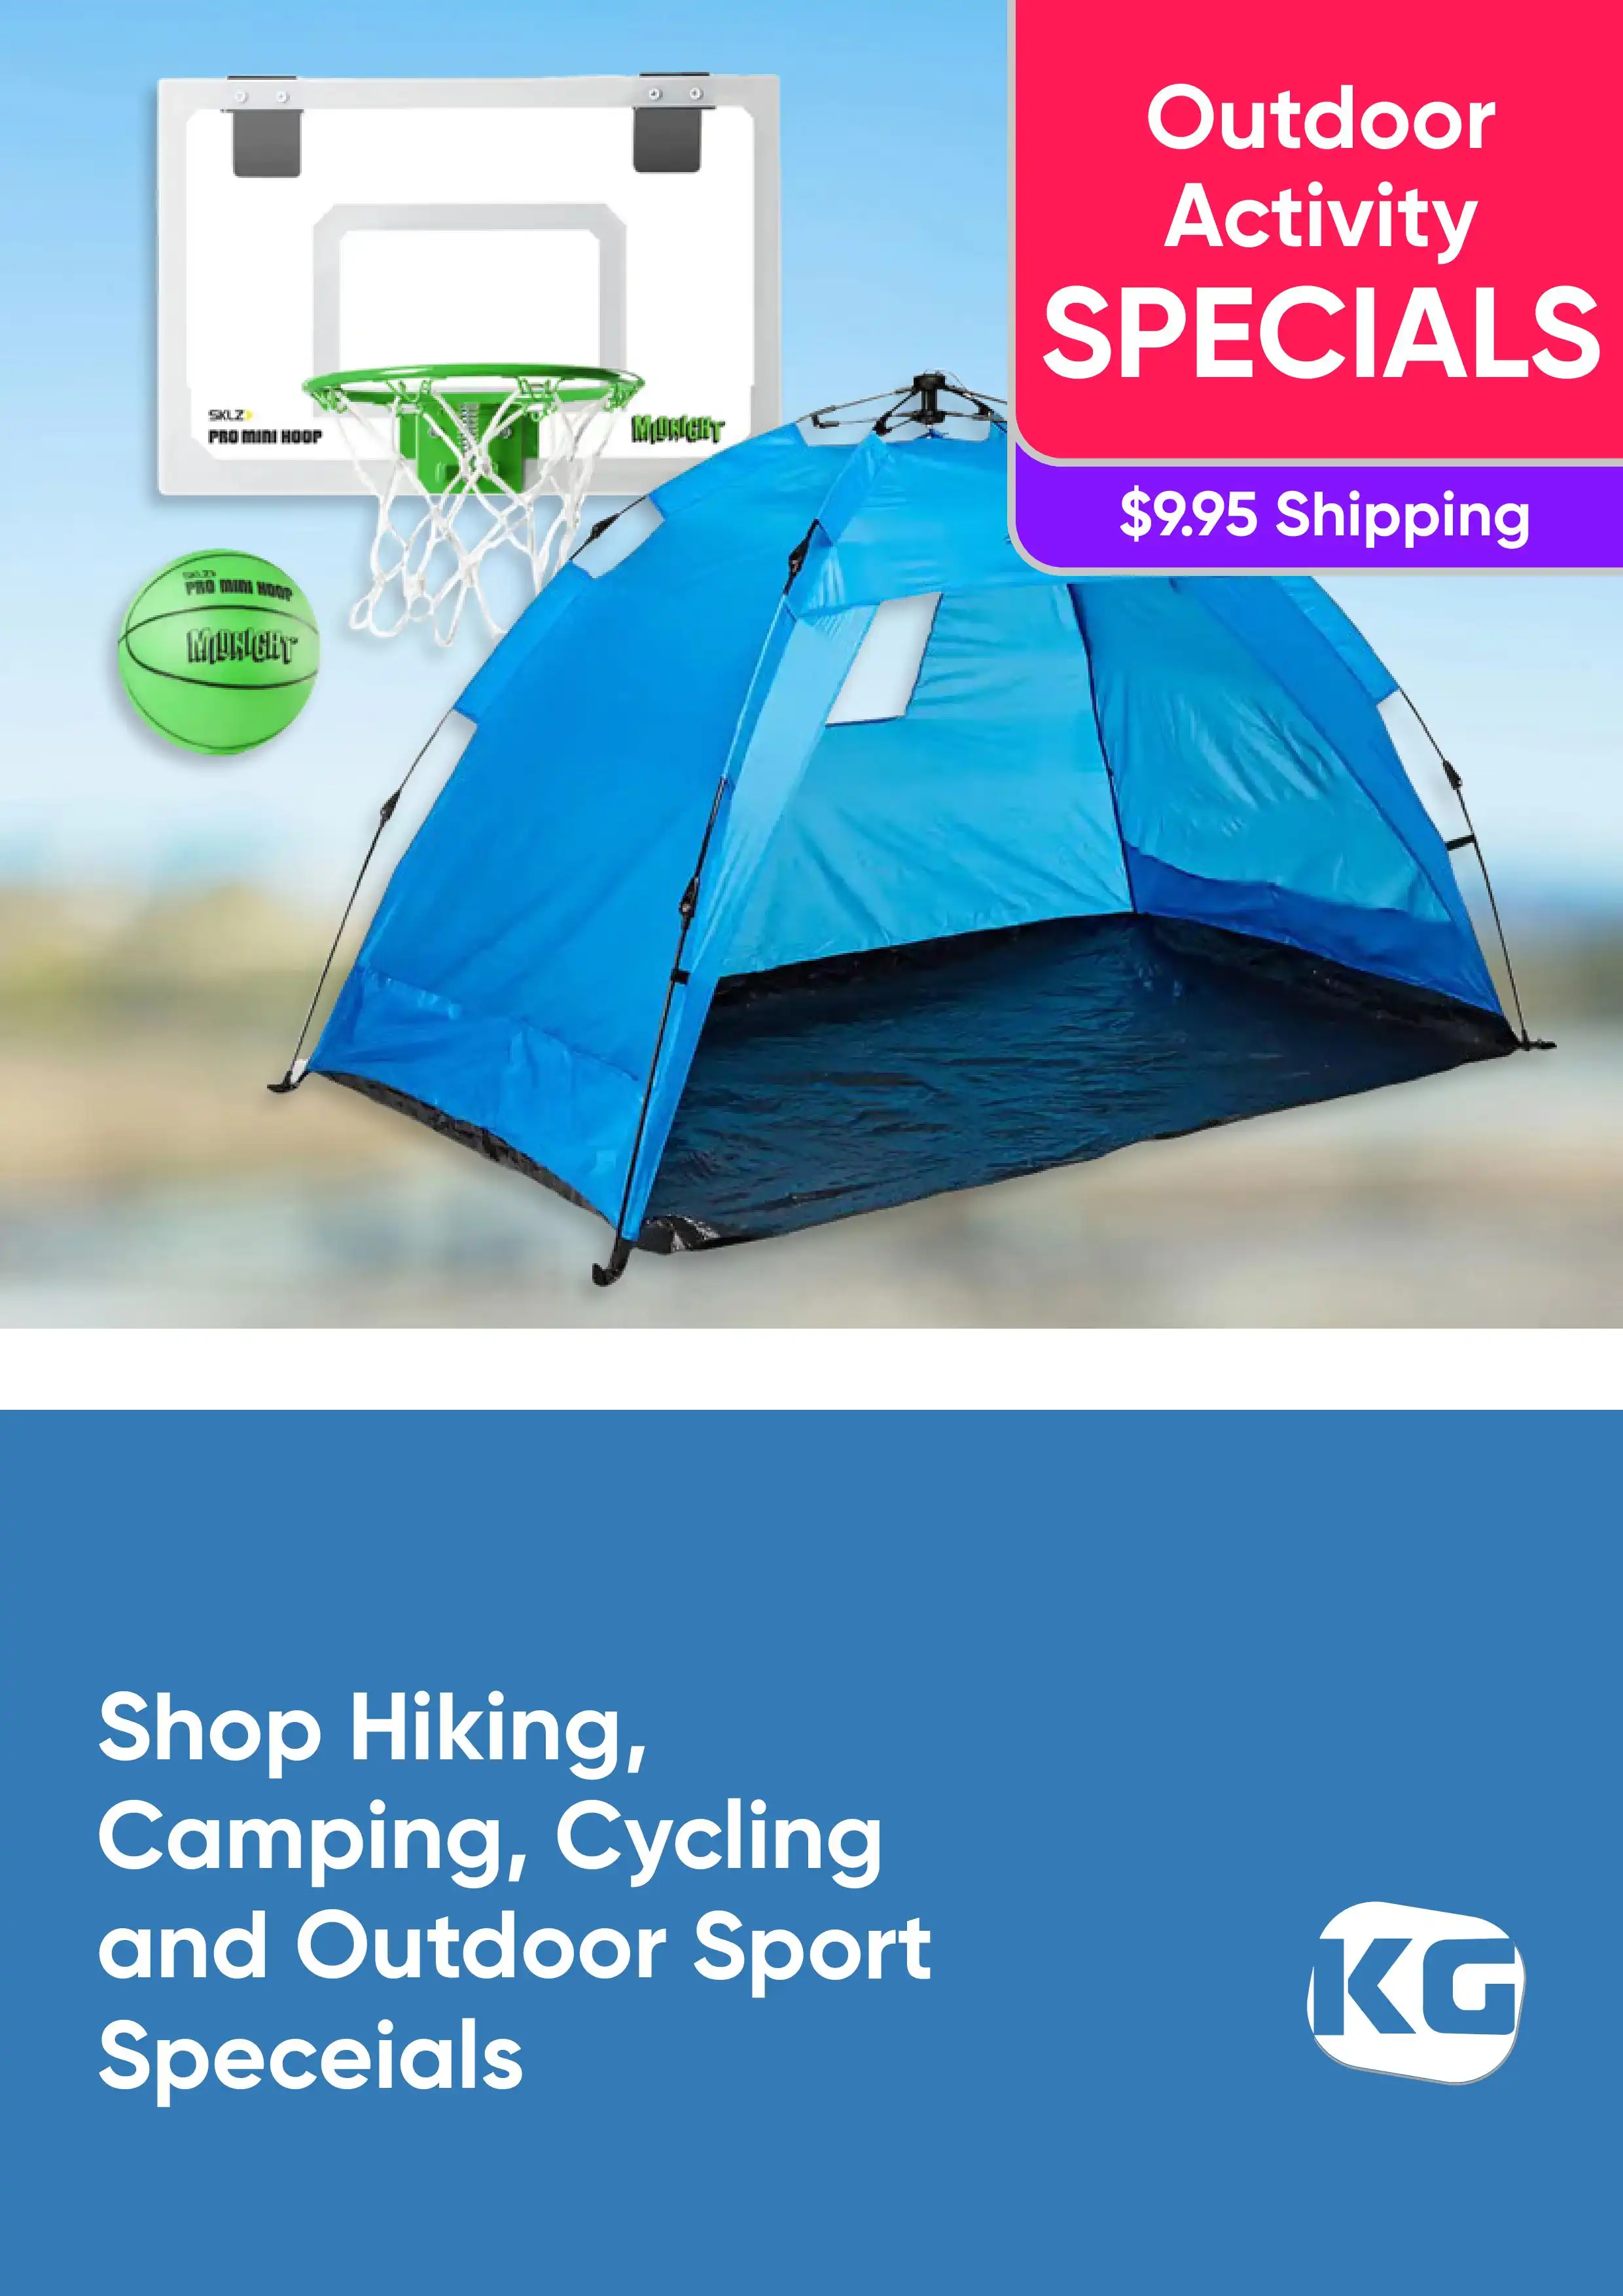 Shop Hiking, Camping, Cycling and Outdoor Sport Activities Specials